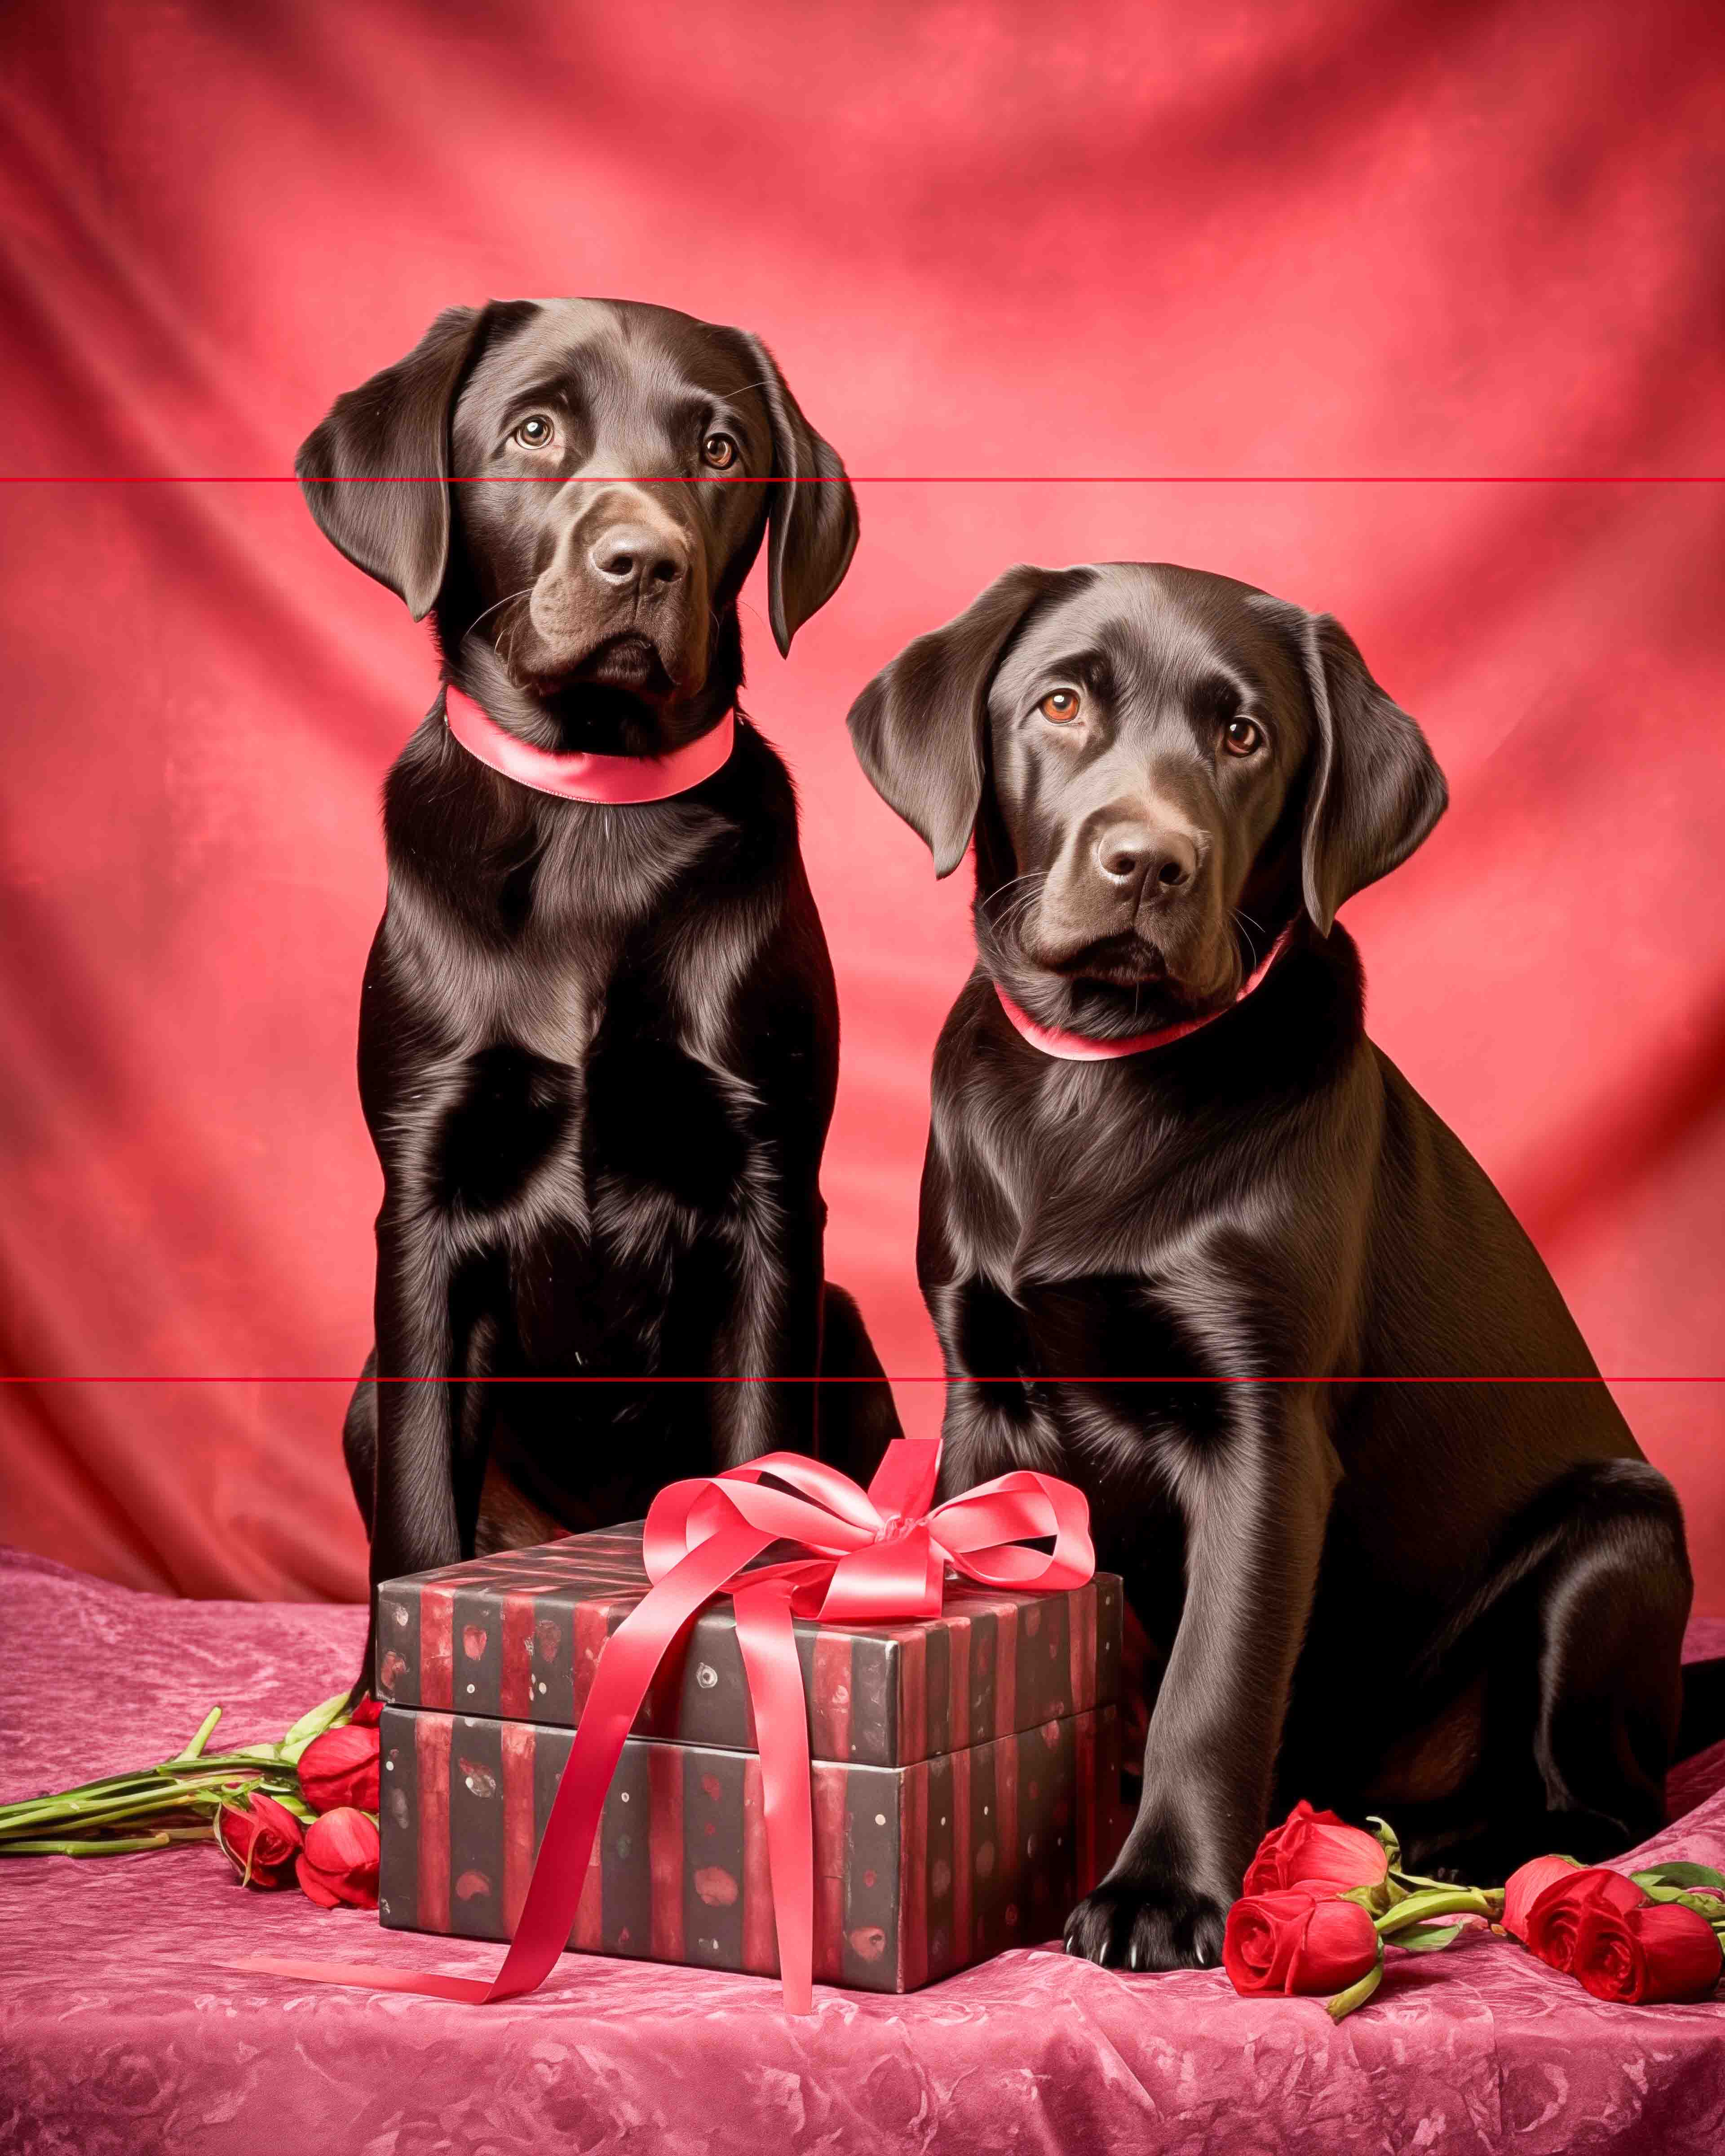 2 chocolate brown Labrador Retrievers guard a giftwrapped box with pink bow and red roses strewn about, against a rose colored drape